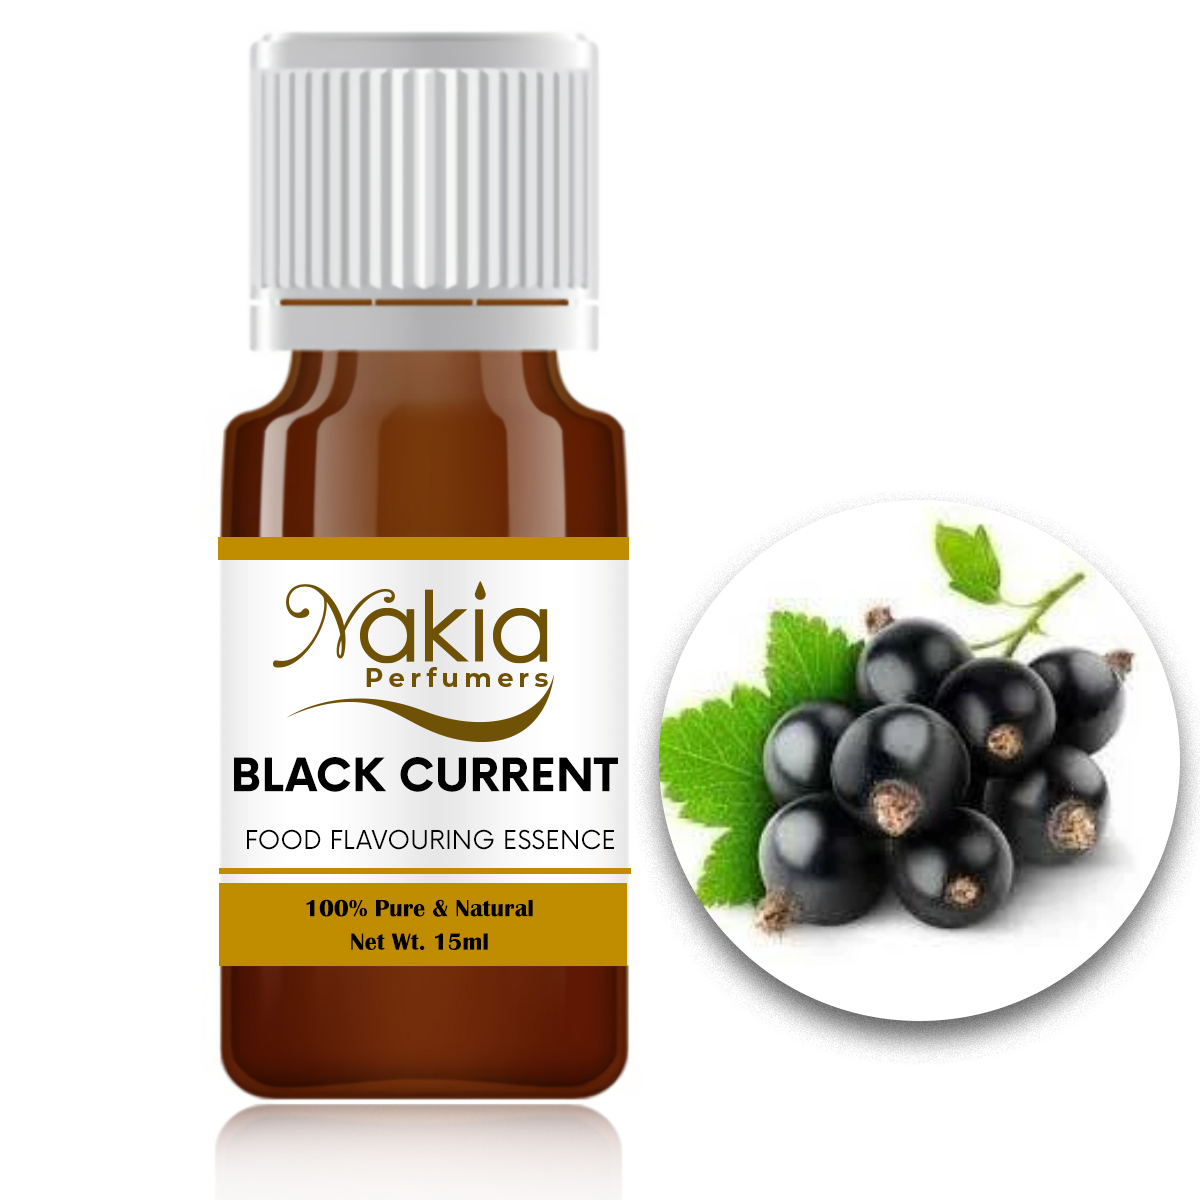 BLACK-CURRENT FLAVOURING ESSENCE